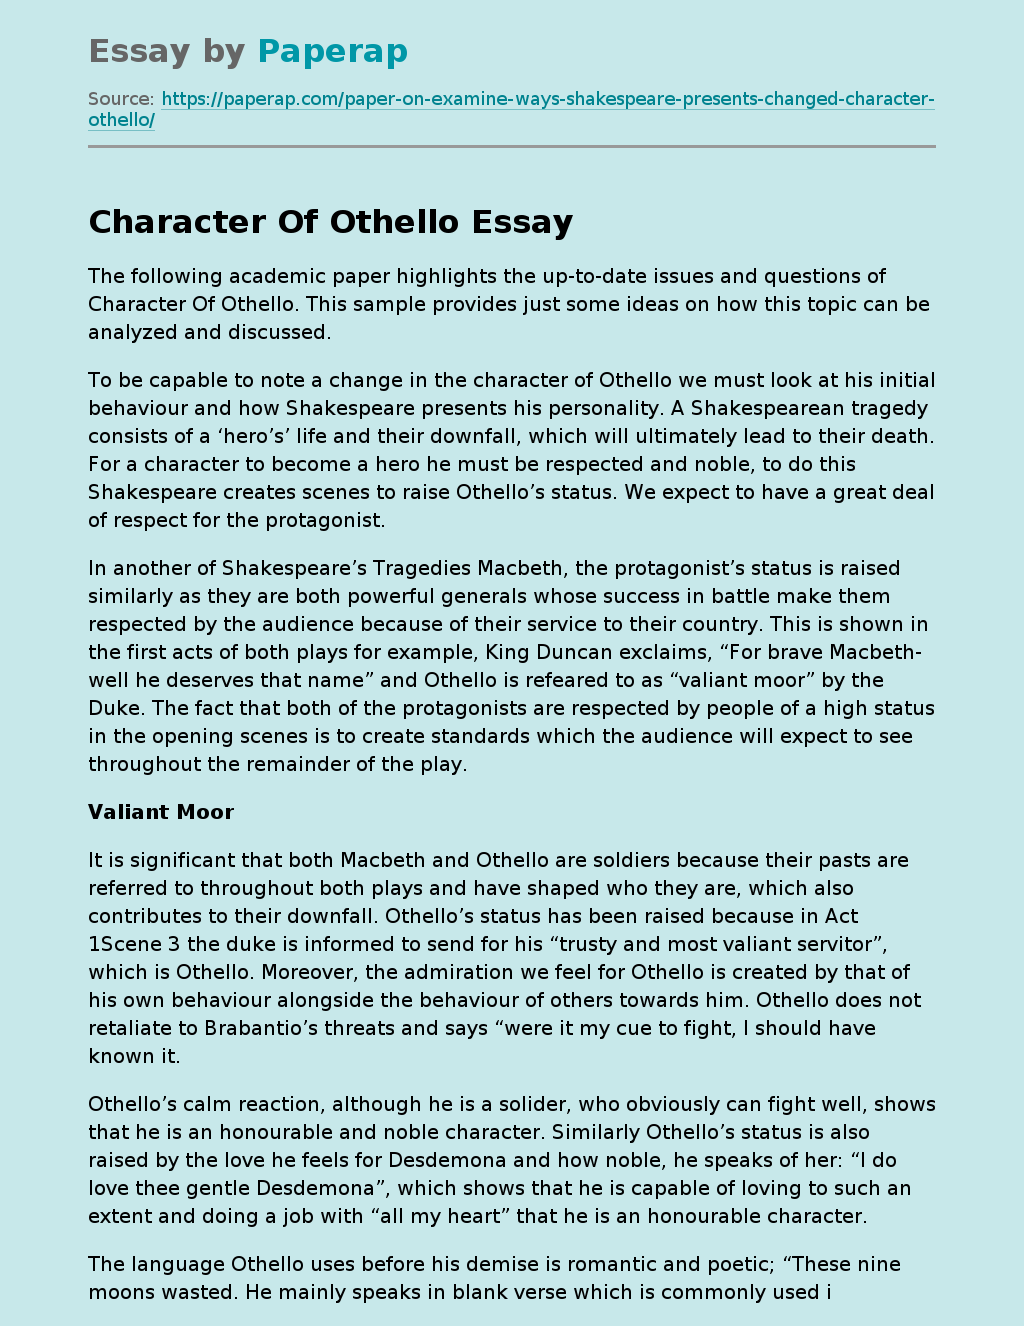 Character Of Othello